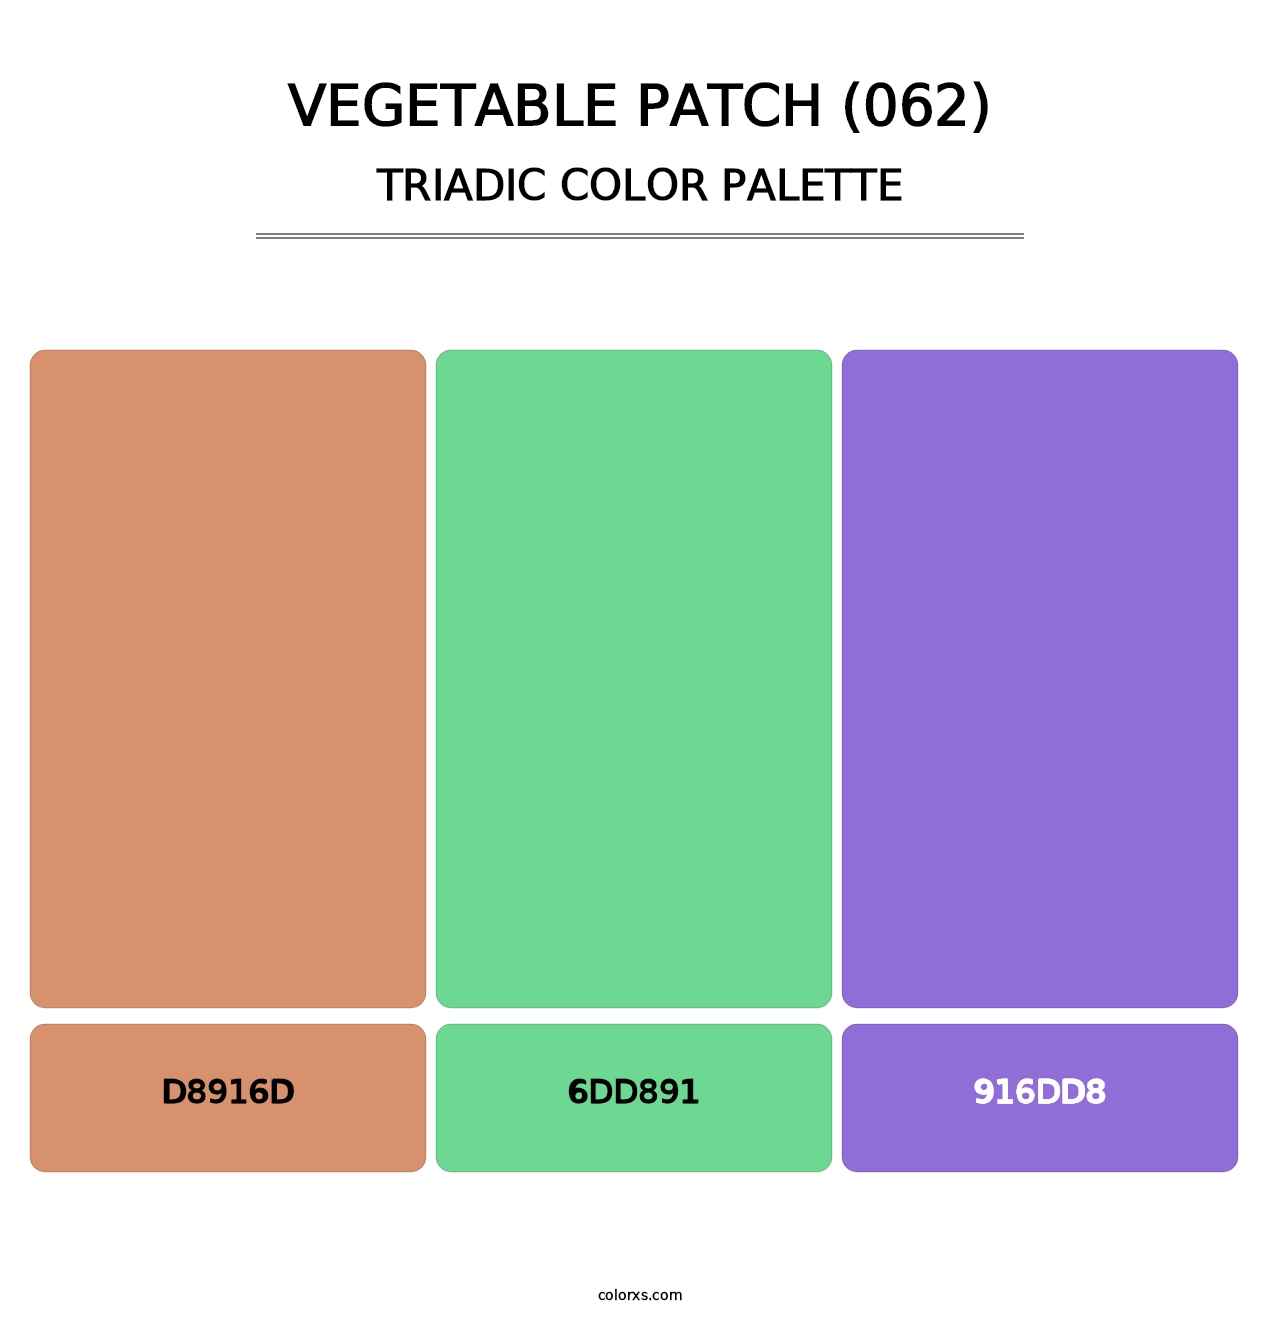 Vegetable Patch (062) - Triadic Color Palette